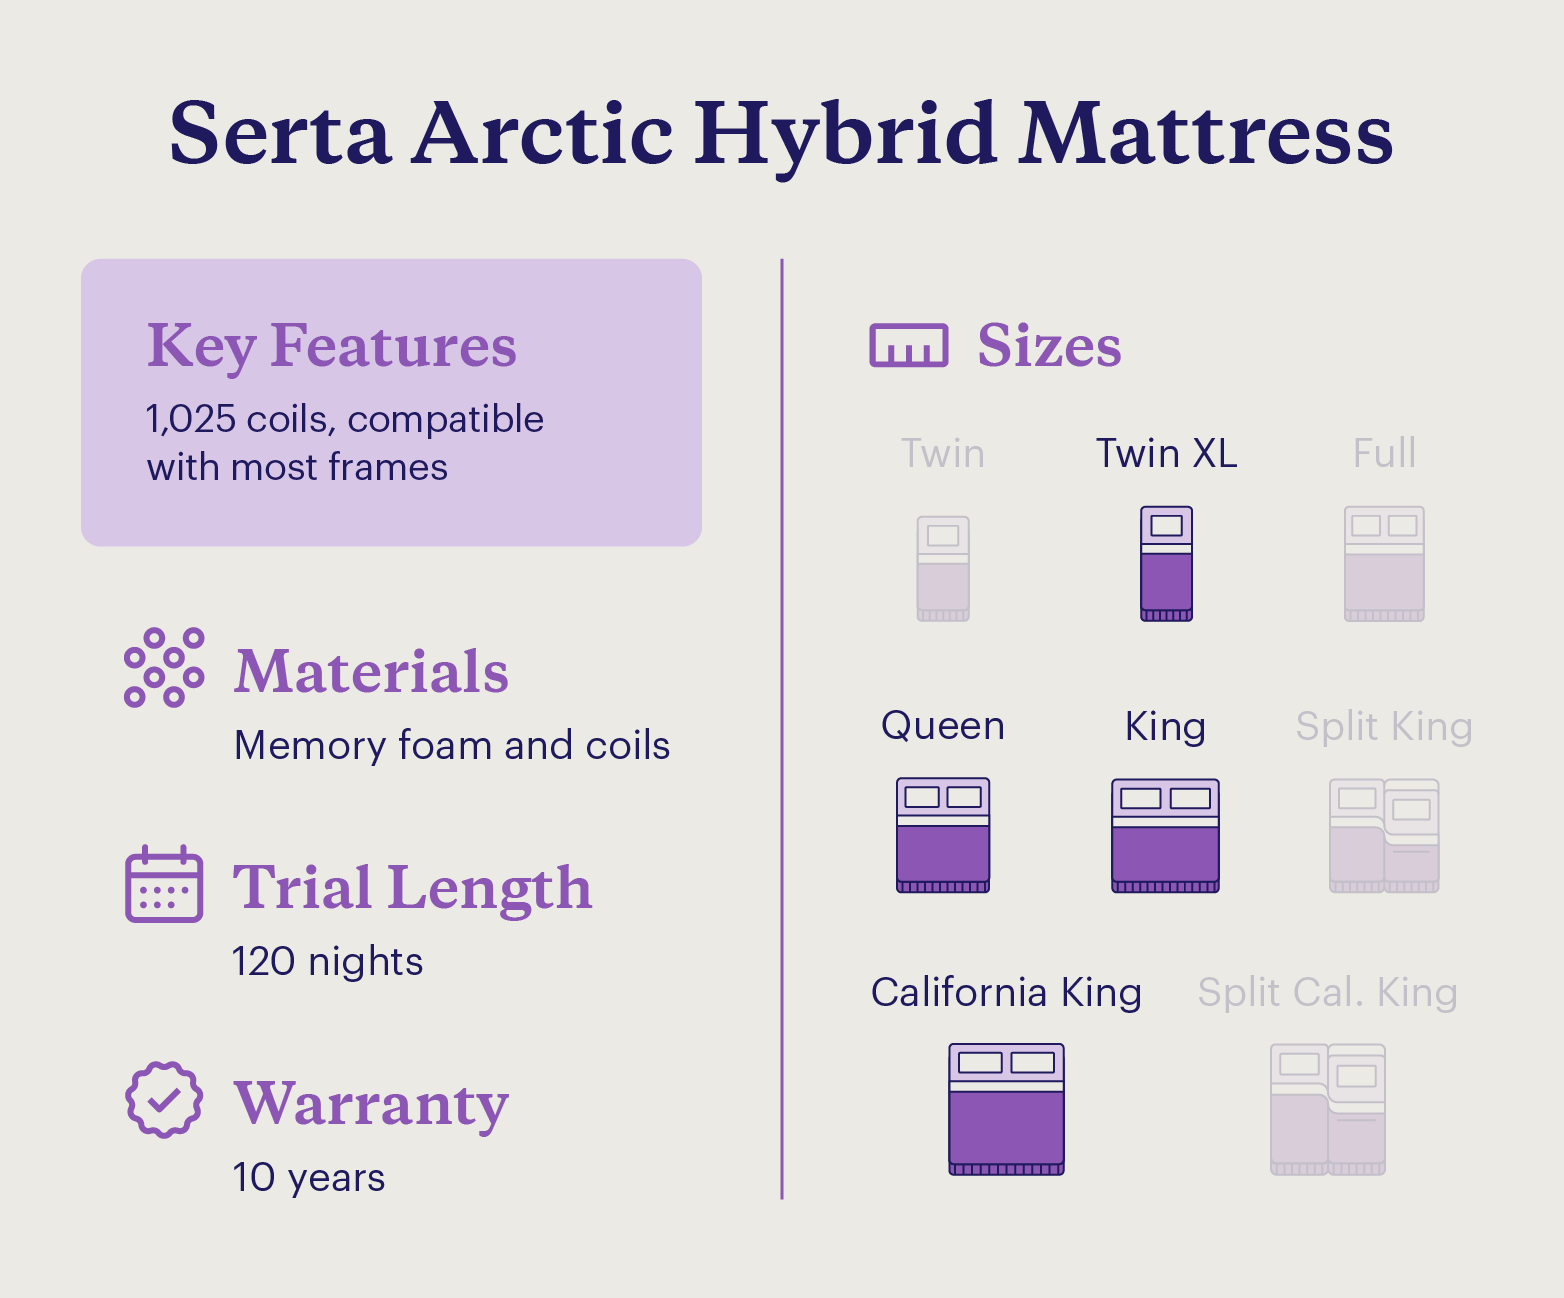 A graphic shows the key features and details of the Serta Arctic Hybrid Mattress.